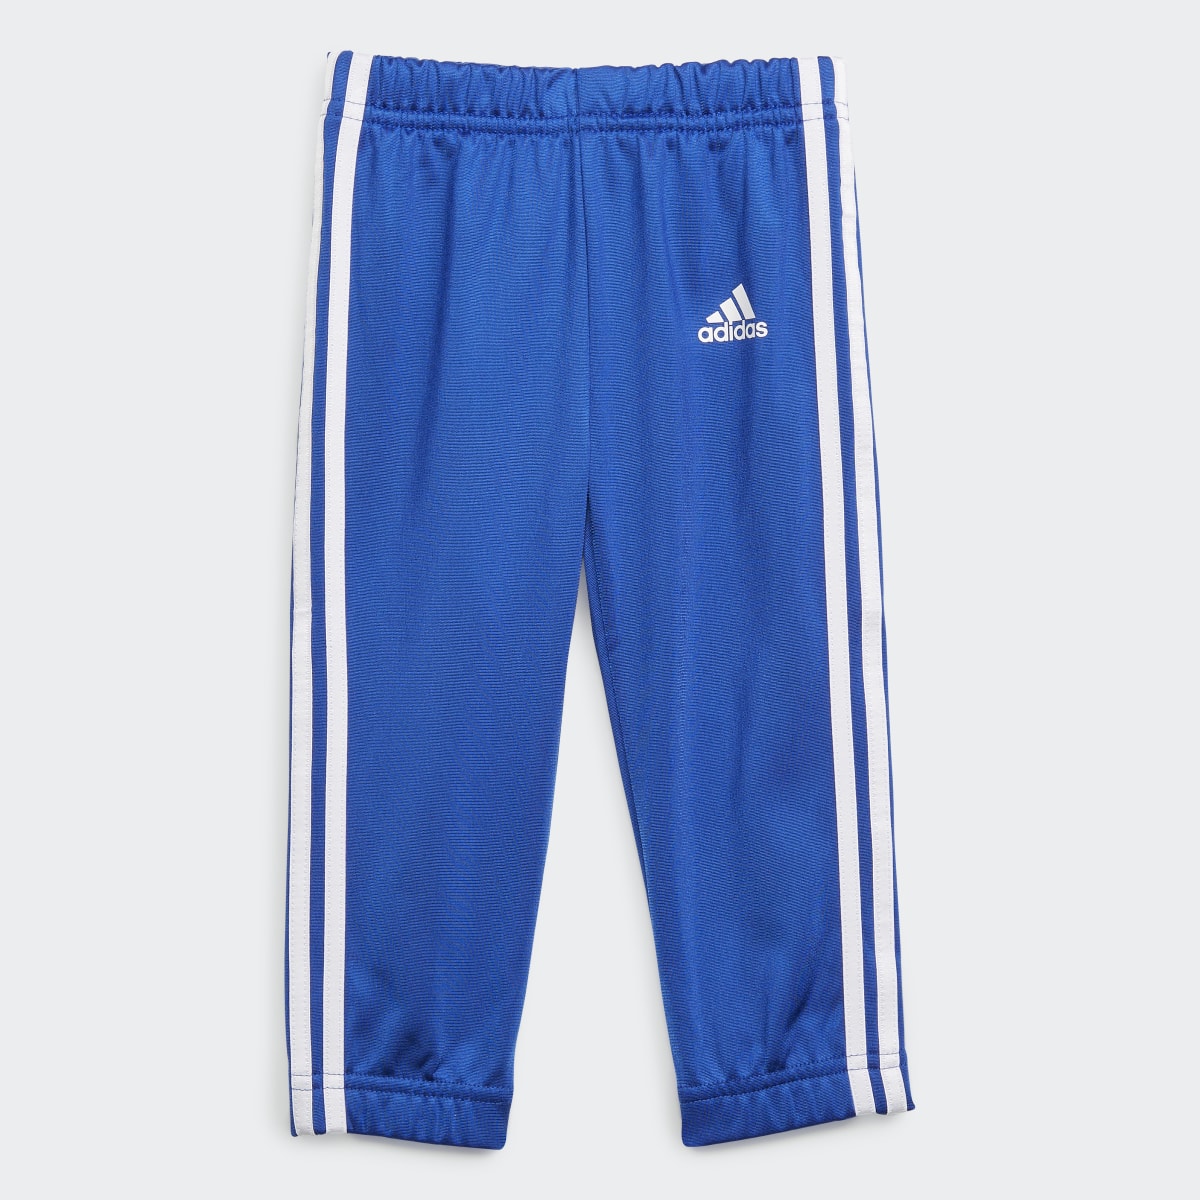 Adidas 3-Stripes Tricot Track Suit. 5